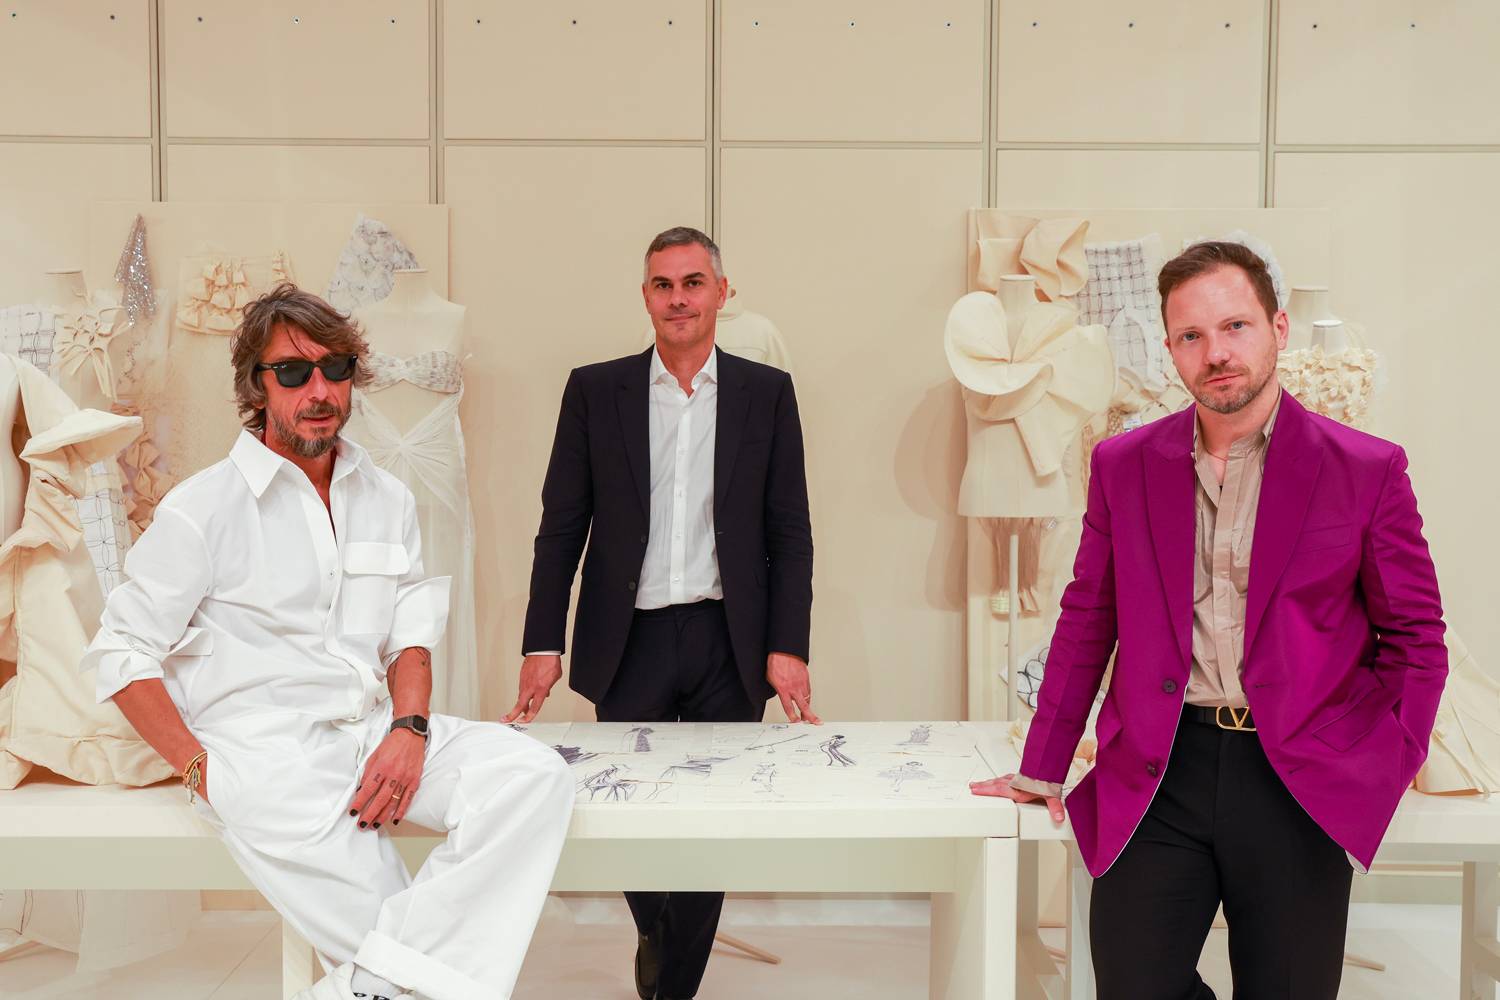 Pierpaolo Piccioli, Massimiliano Gioni et Alexander Fury at the exhibition “Forever Valentino” at M7 in Doha. Credit : Dave Benett/Getty Images